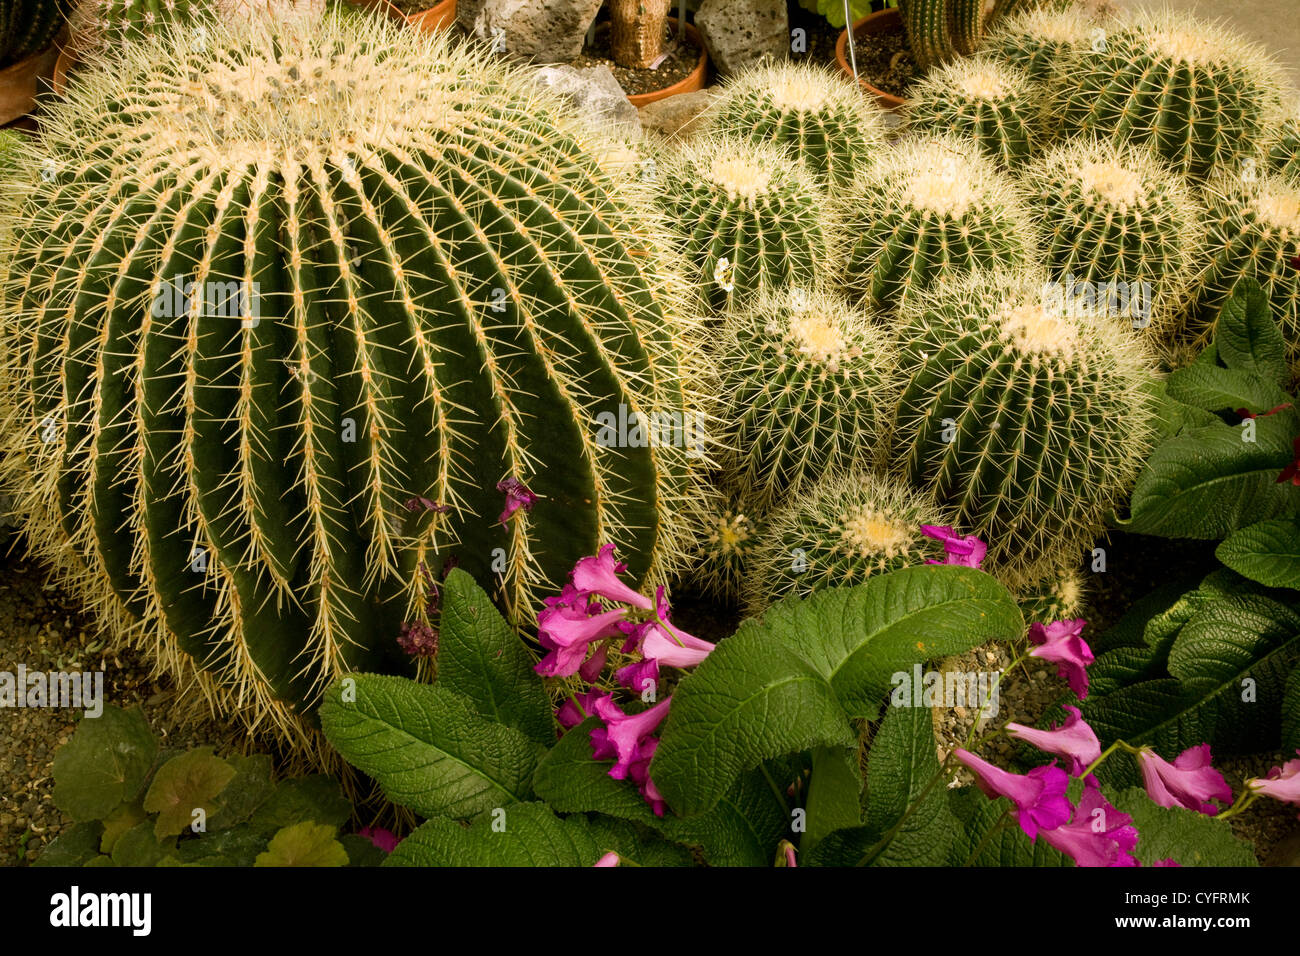 WA05523-00...WASHINGTON - Cactus thriving among the flowers in the Conservatory at Manito City Park in Spokane. Stock Photo